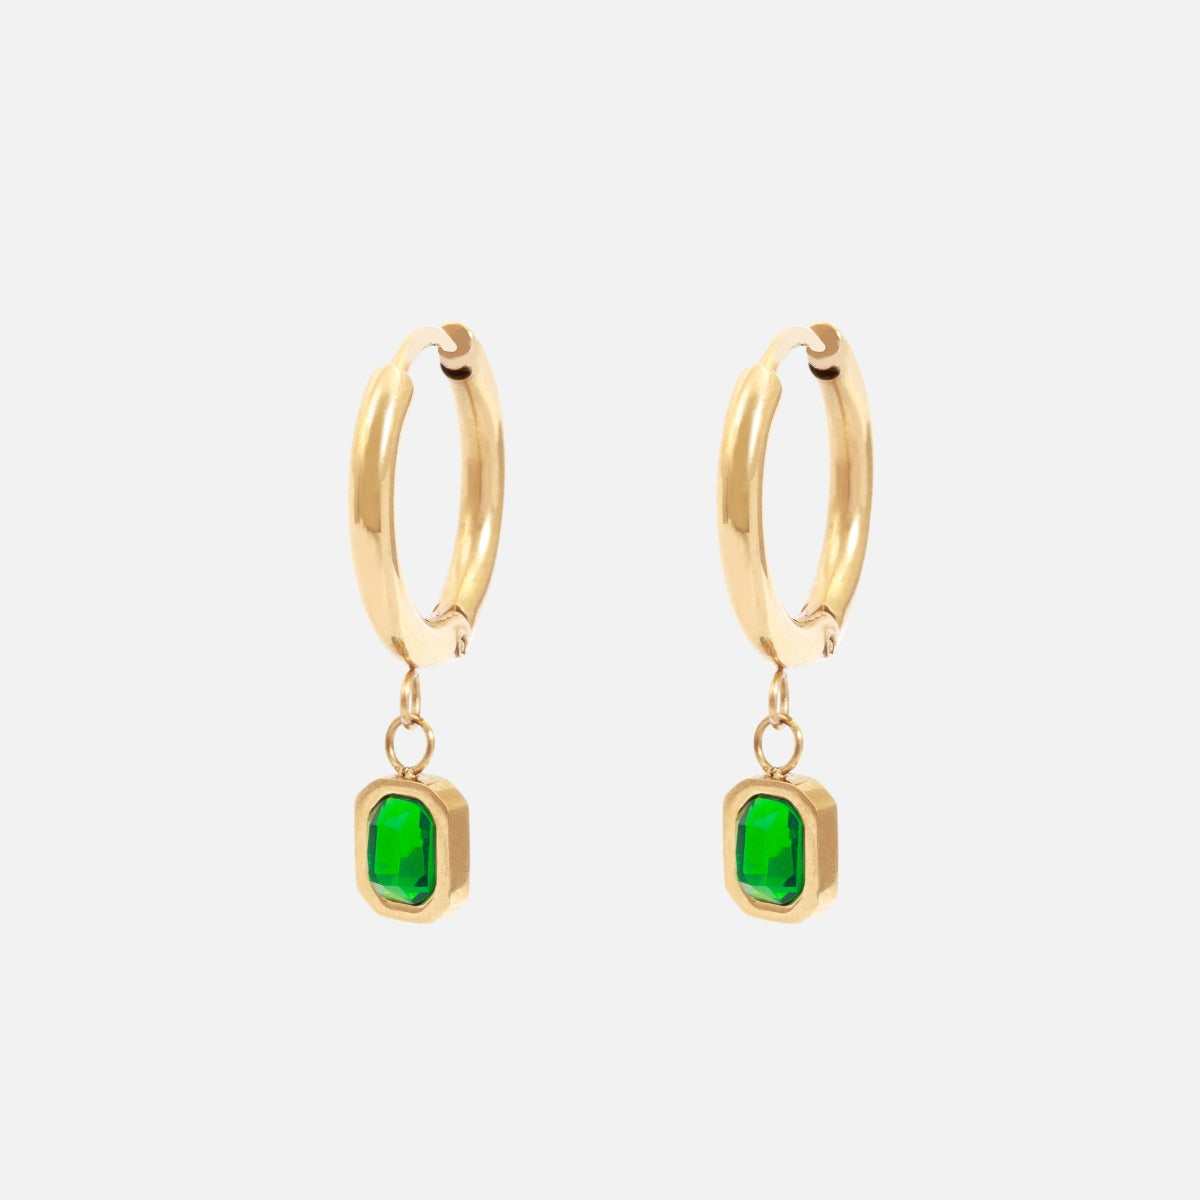 Golden stainless steel hoops earrings and emerald charm